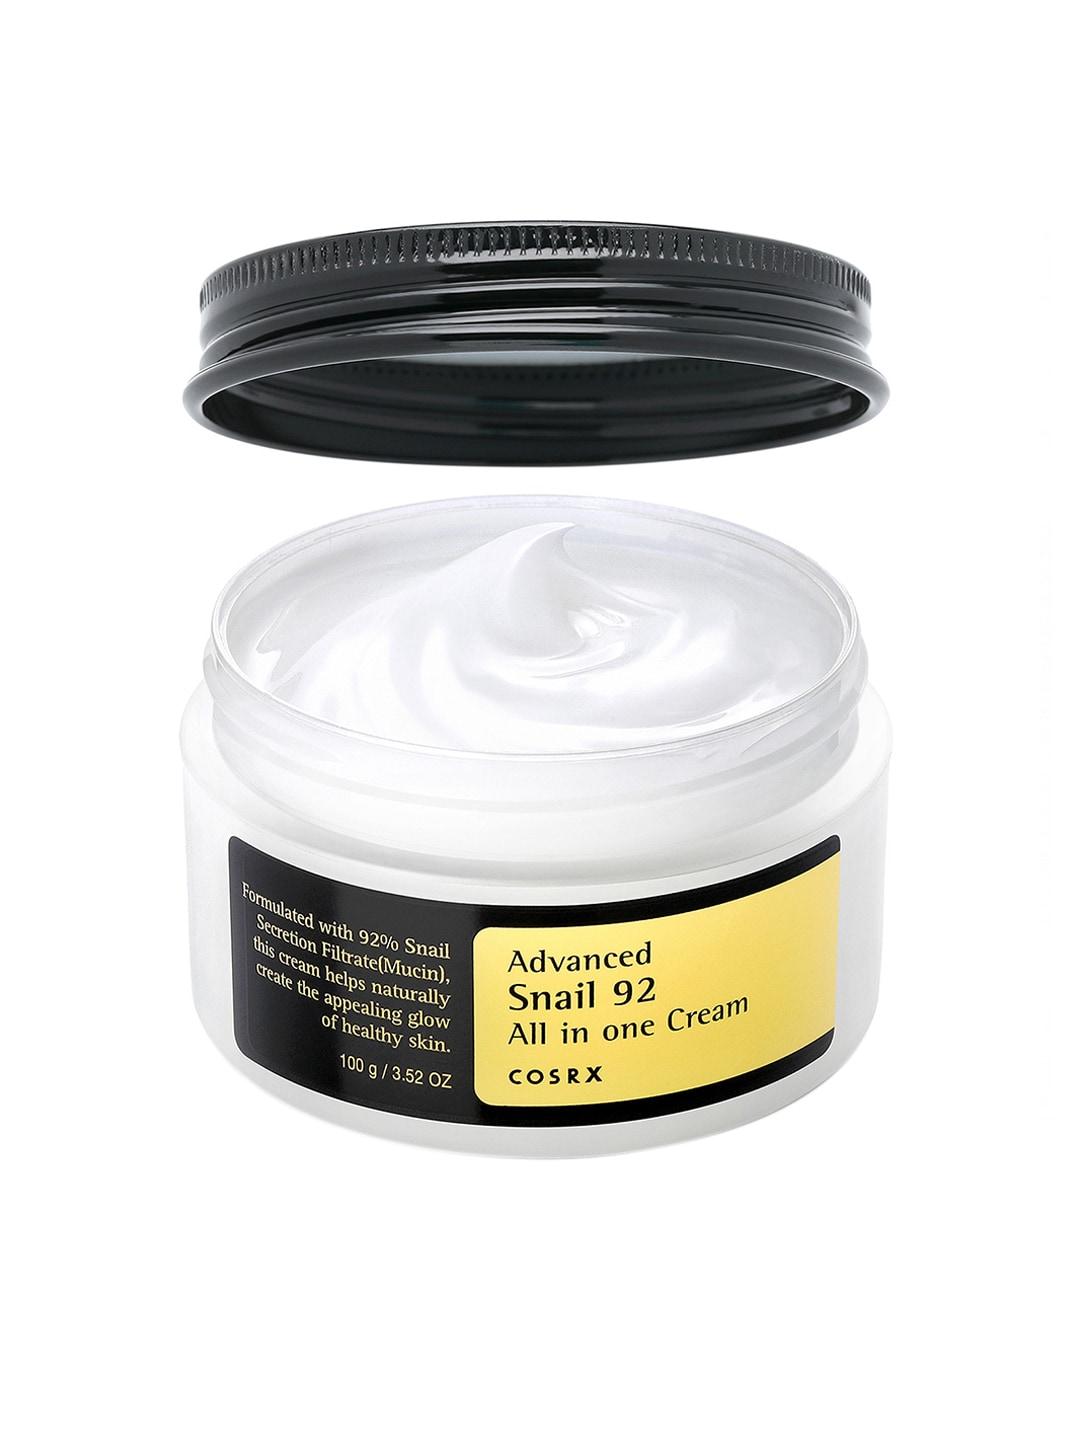 COSRX Advanced Snail 92 All in One Repair Cream with 92% Snail Mucin for Moisturizing-100g